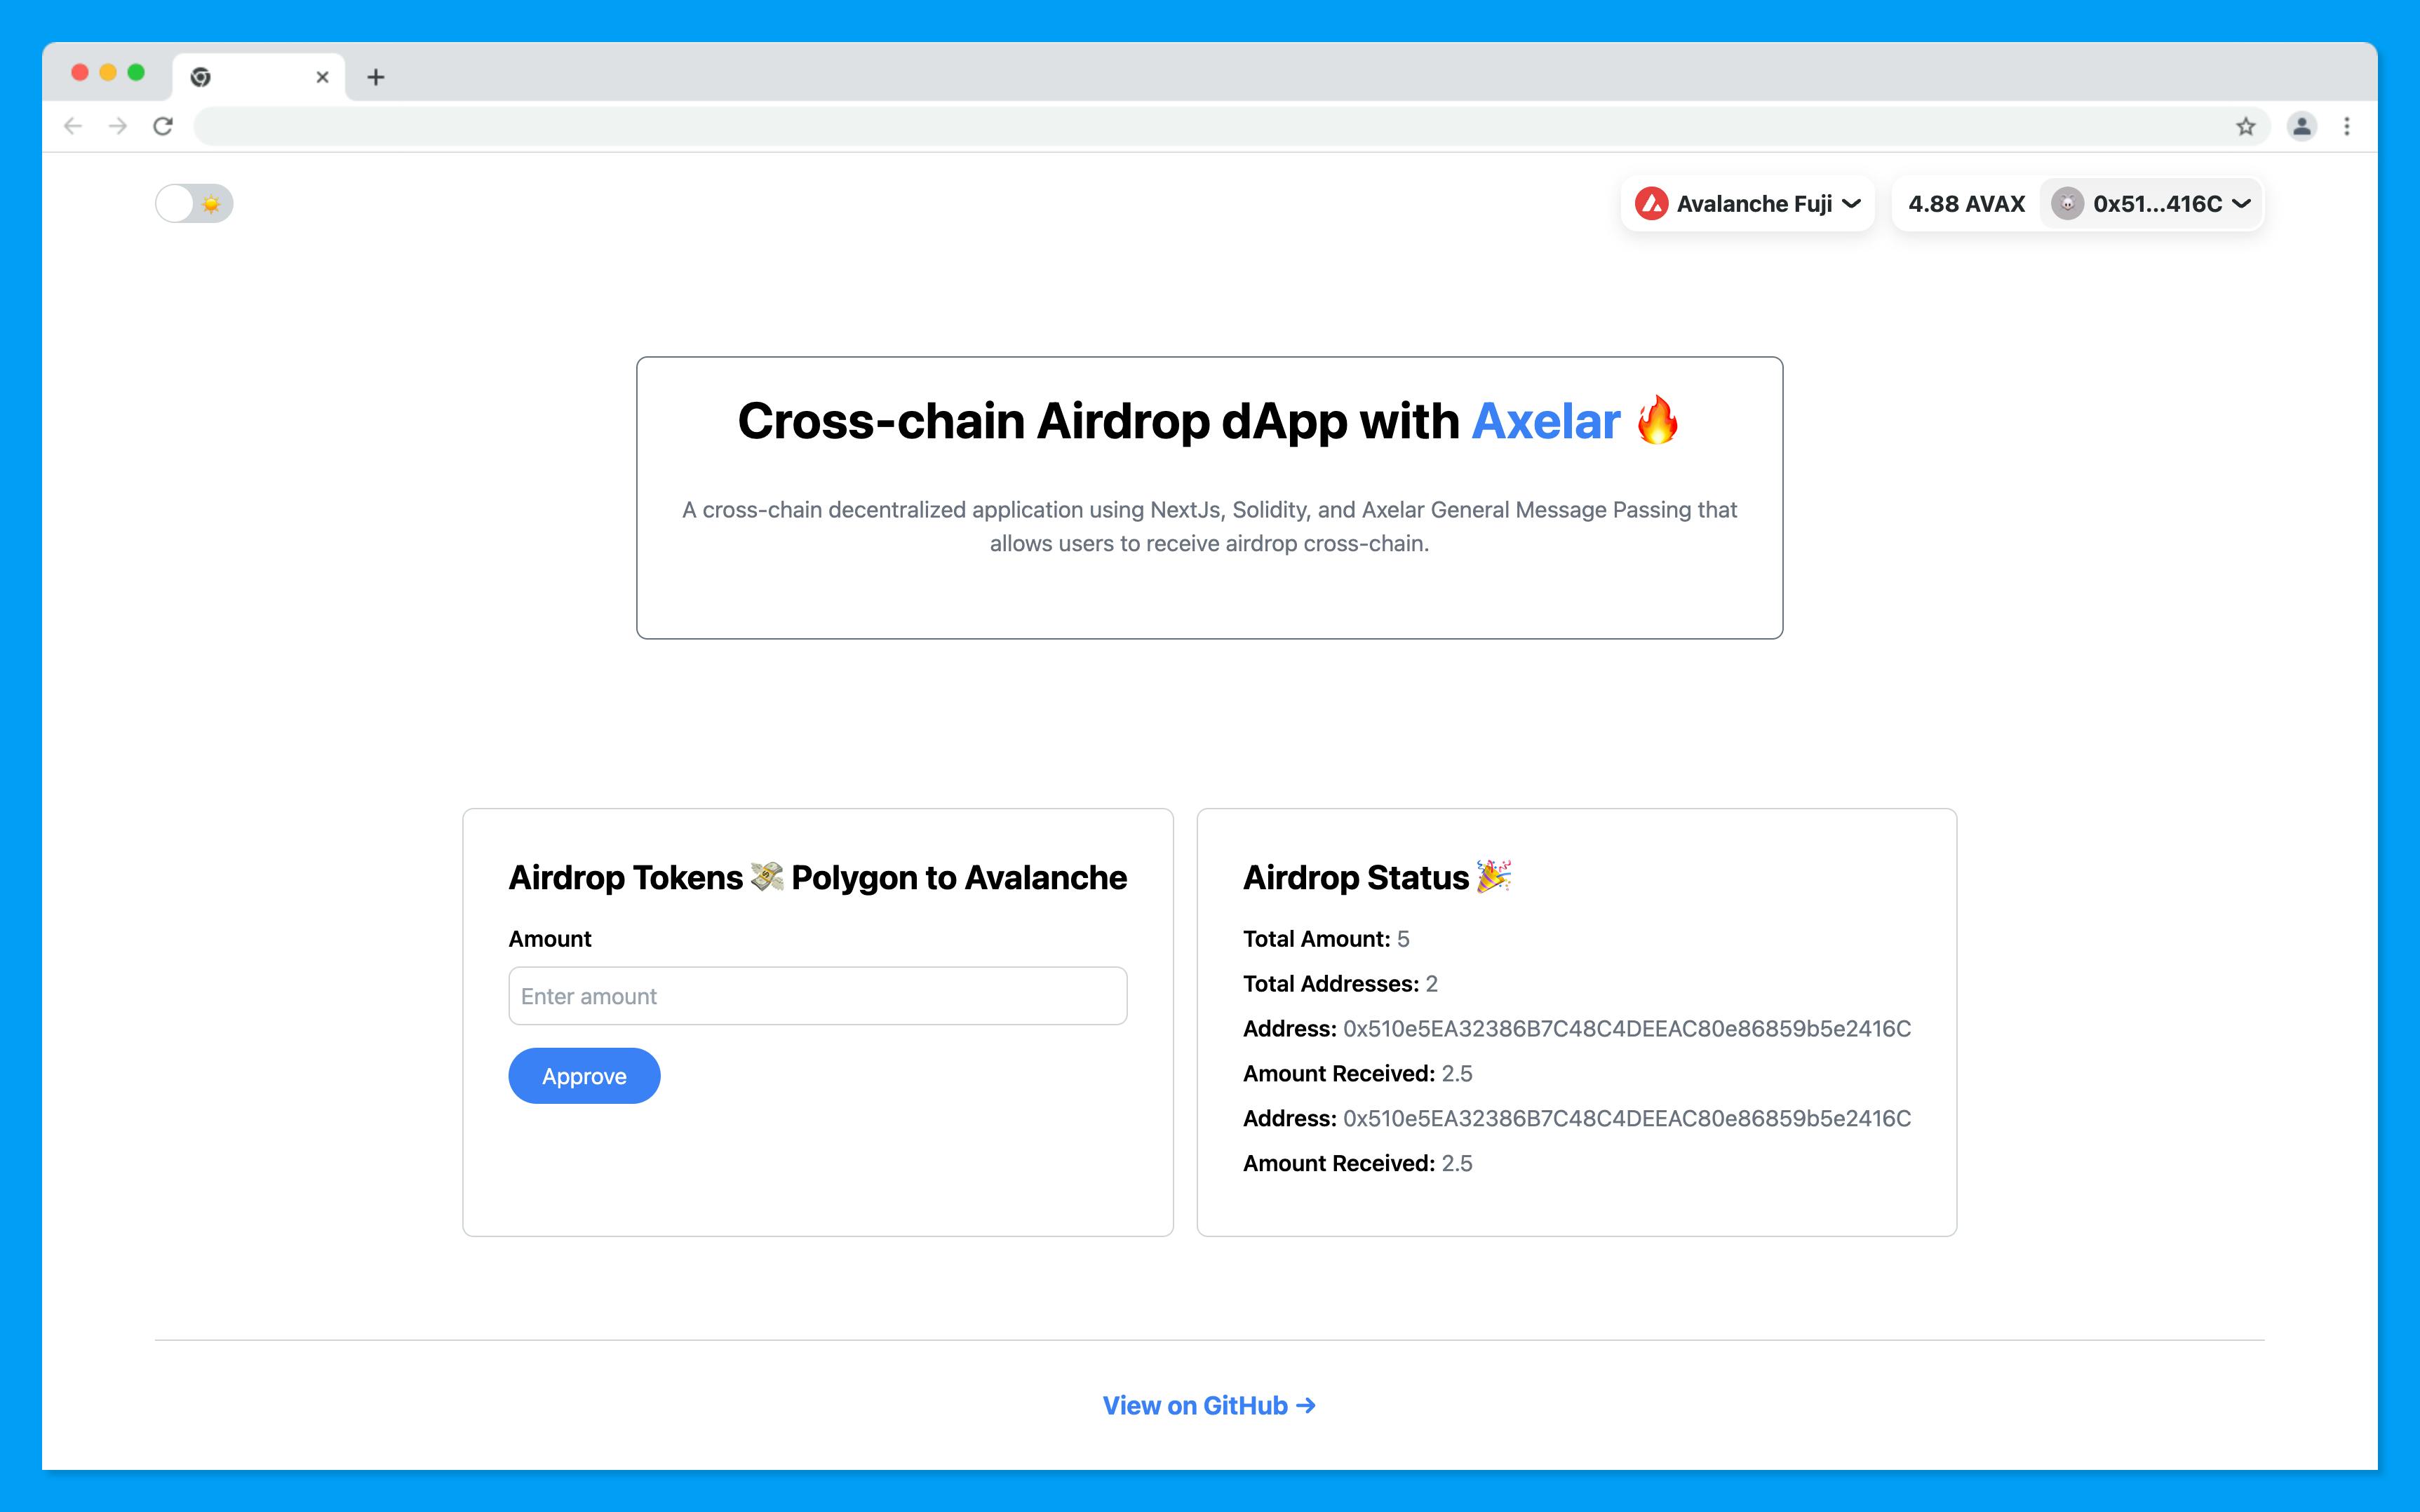 Cross-chain Airdrop DApp with Solidity, Next.js & Axelar